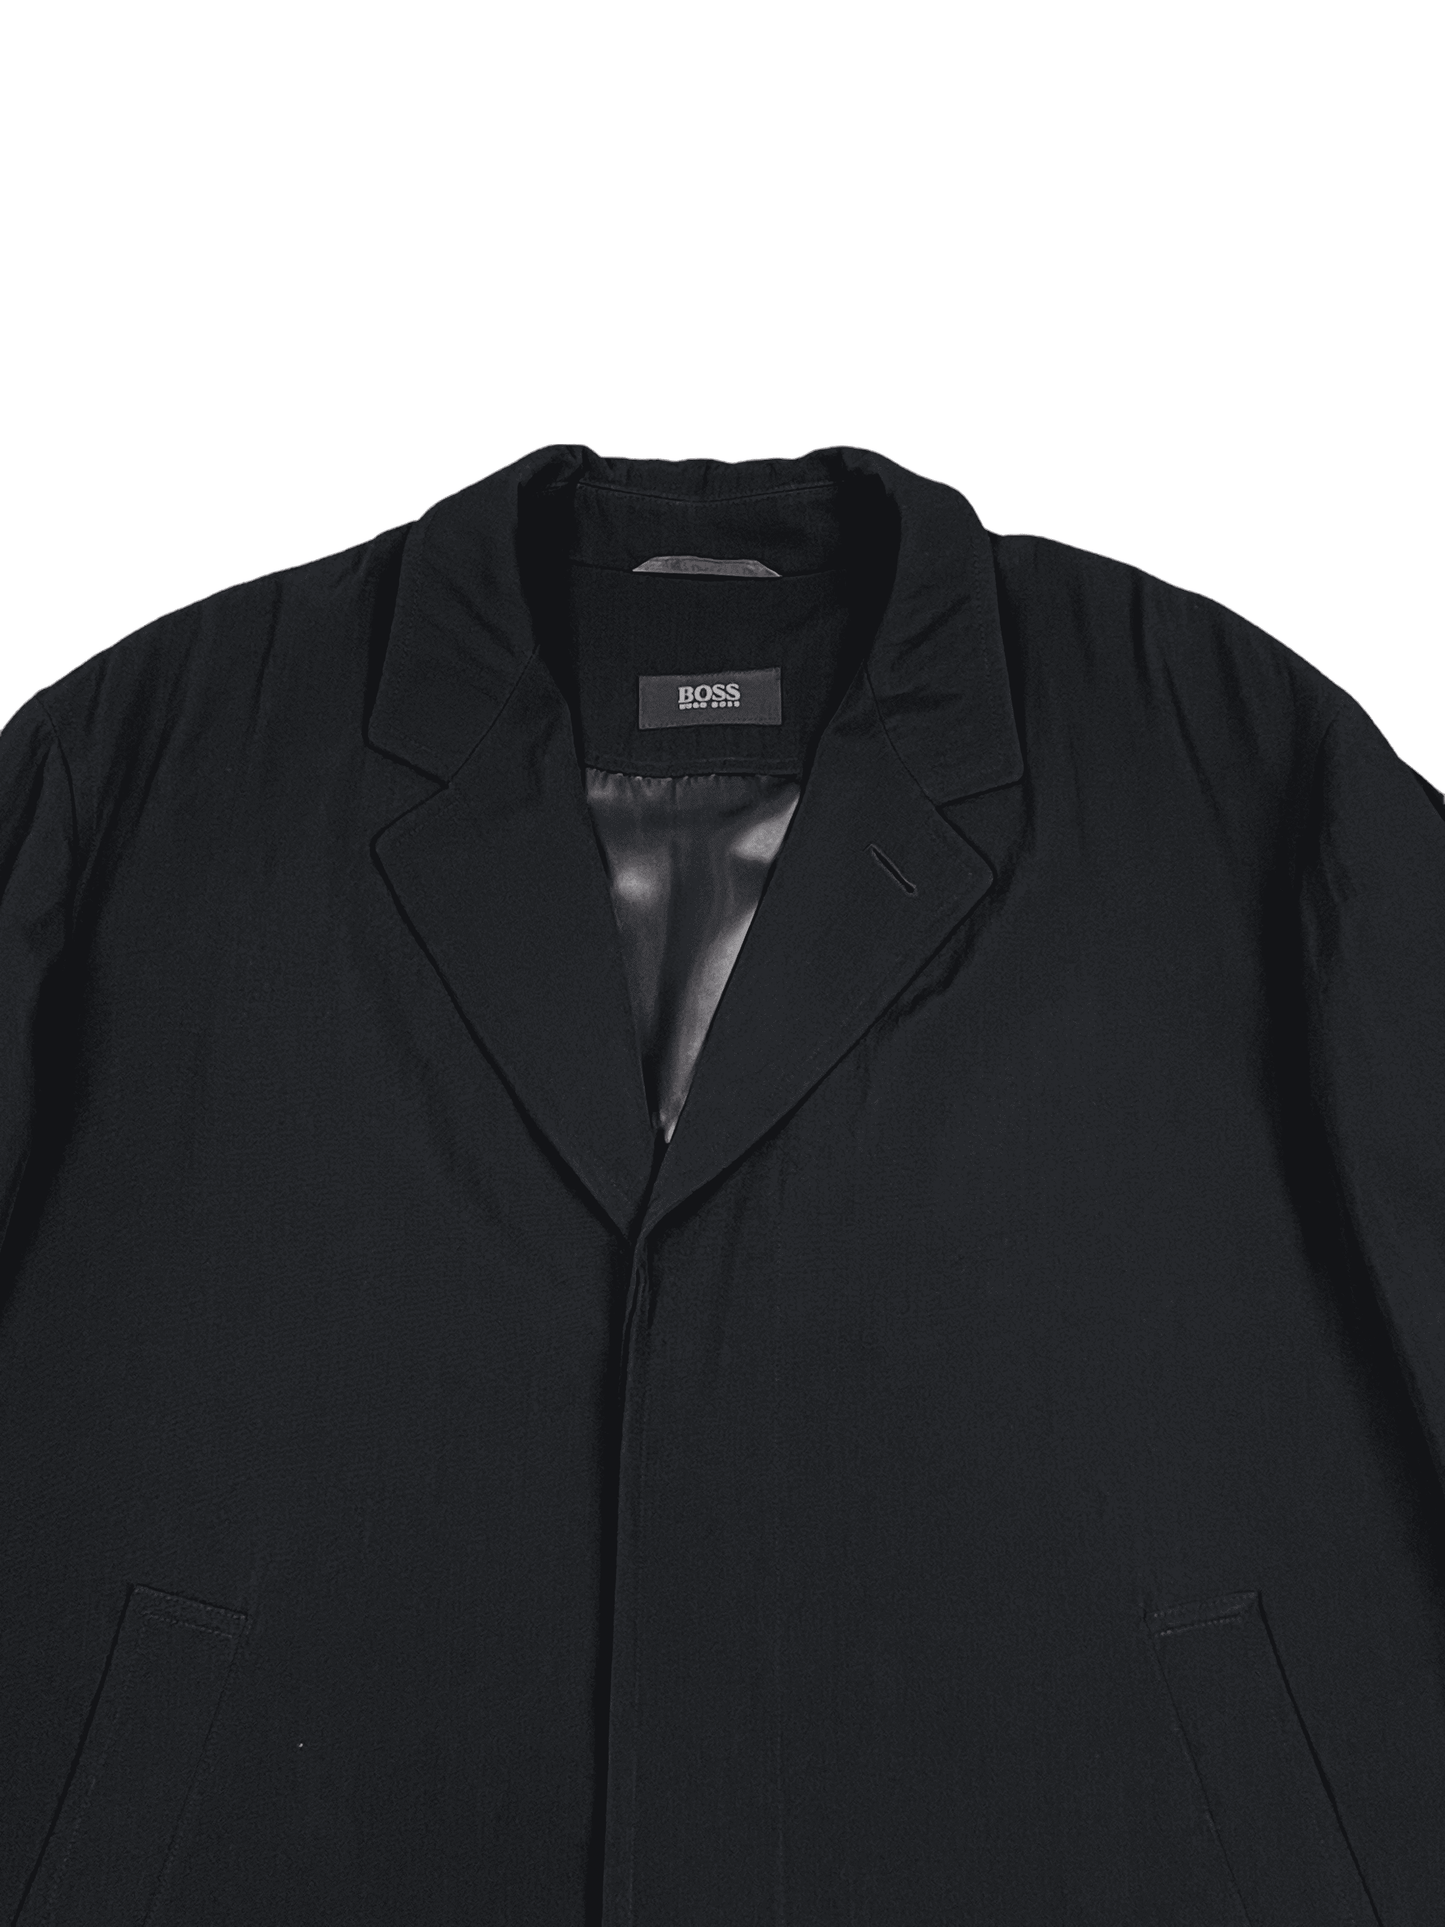 Hugo Boss Black Wool Blend Top Coat – 54R / XXL - Genuine Design Luxury Consignment for Men. New & Pre-Owned Clothing, Shoes, & Accessories. Calgary, Canada